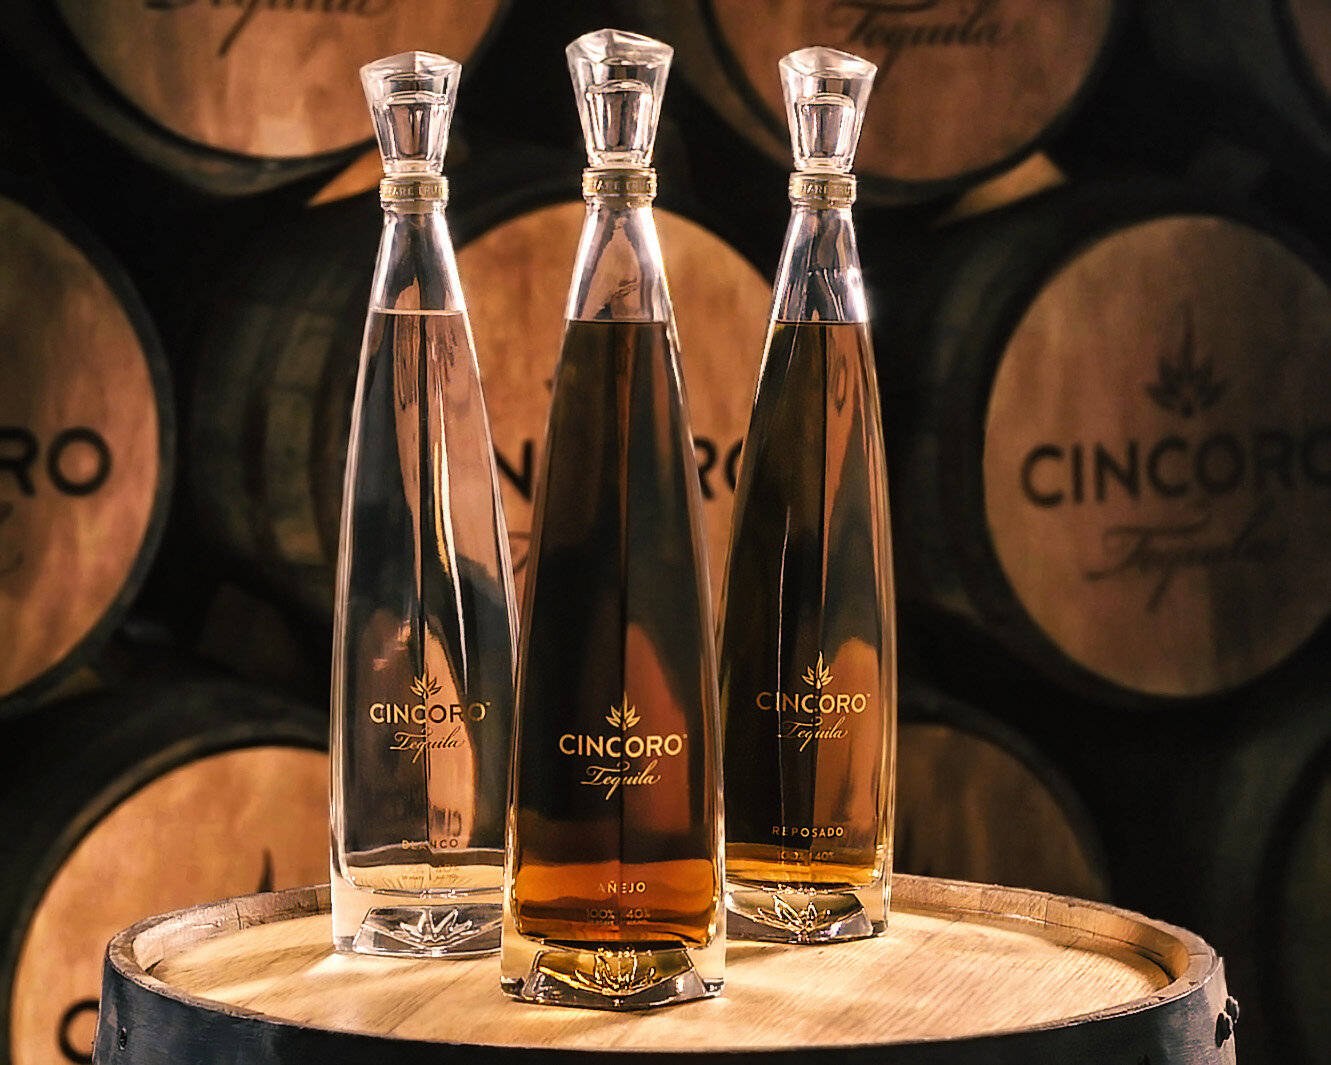 A Luxurious Experience - Cincoro Tequila Bottle presented on a Wooden Cask Wallpaper